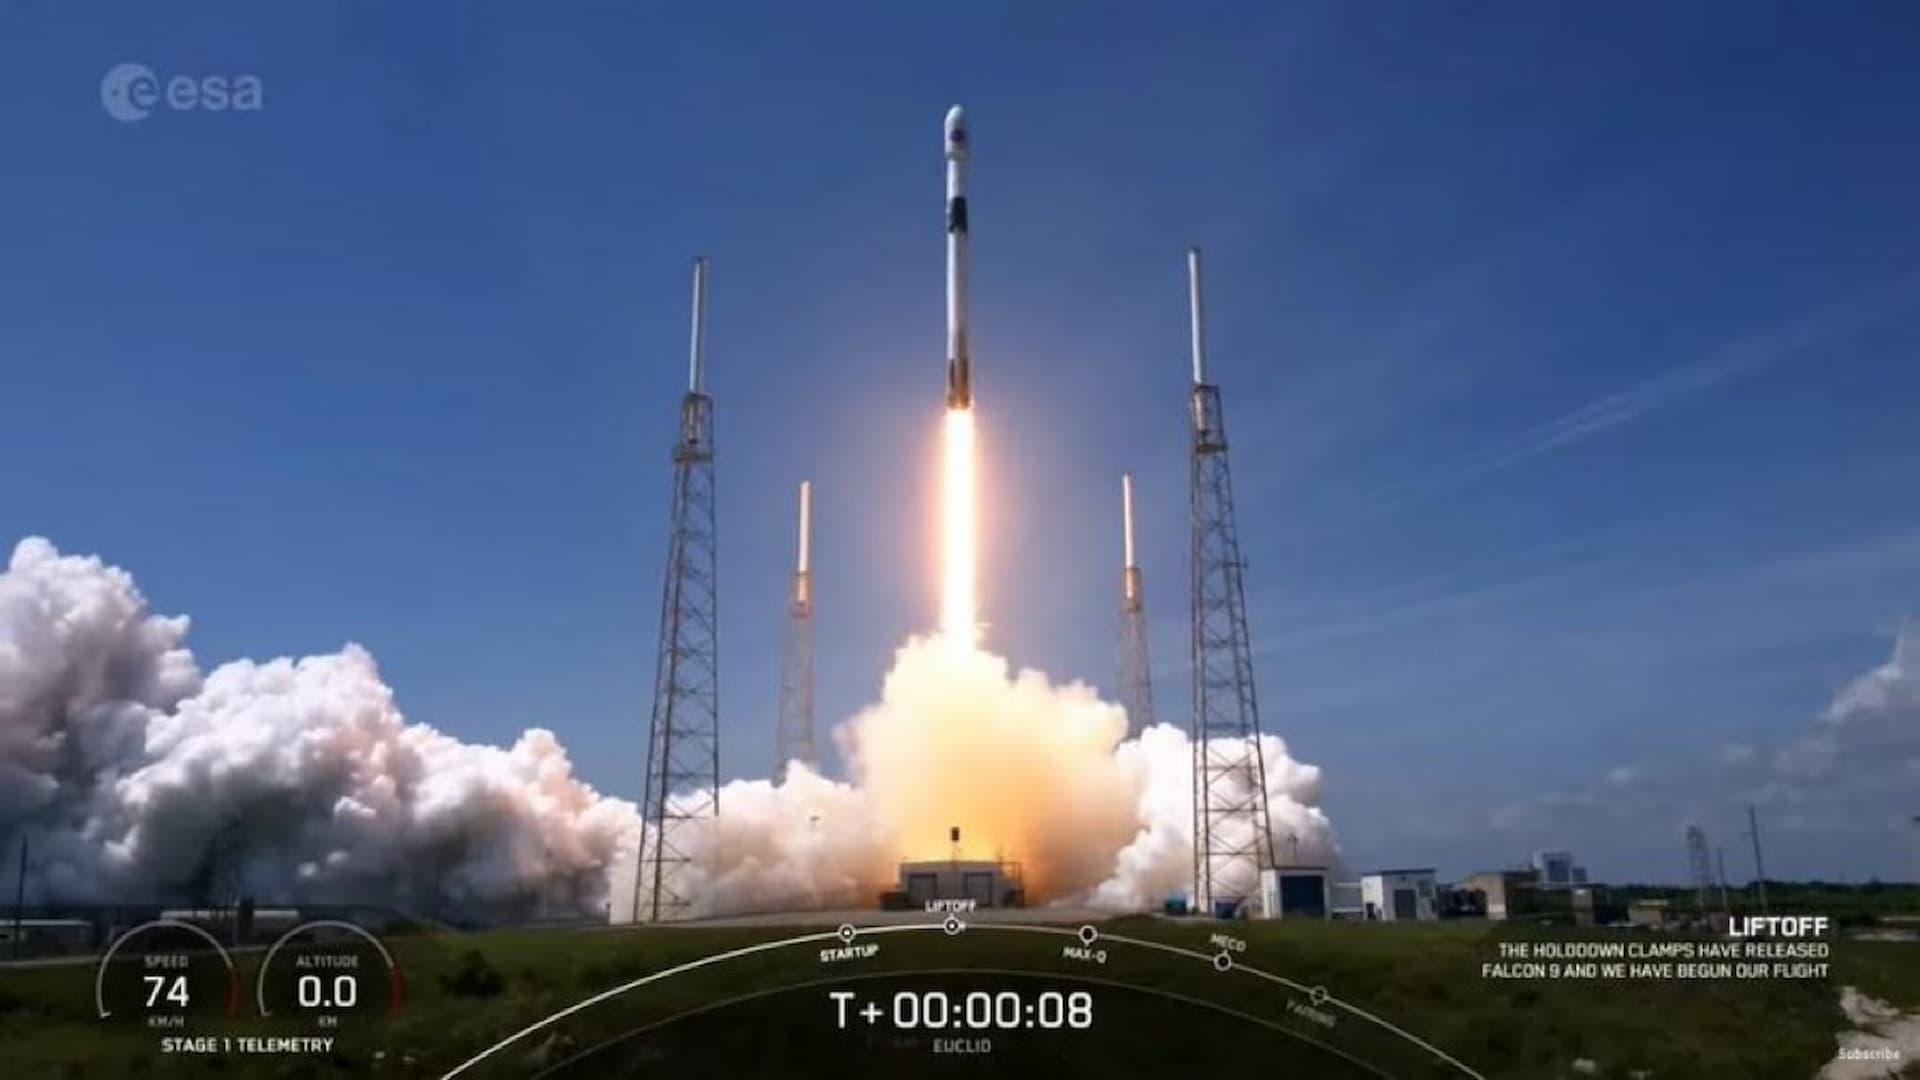 EUROPE’S EUCLID MISSION LIFTS OFF